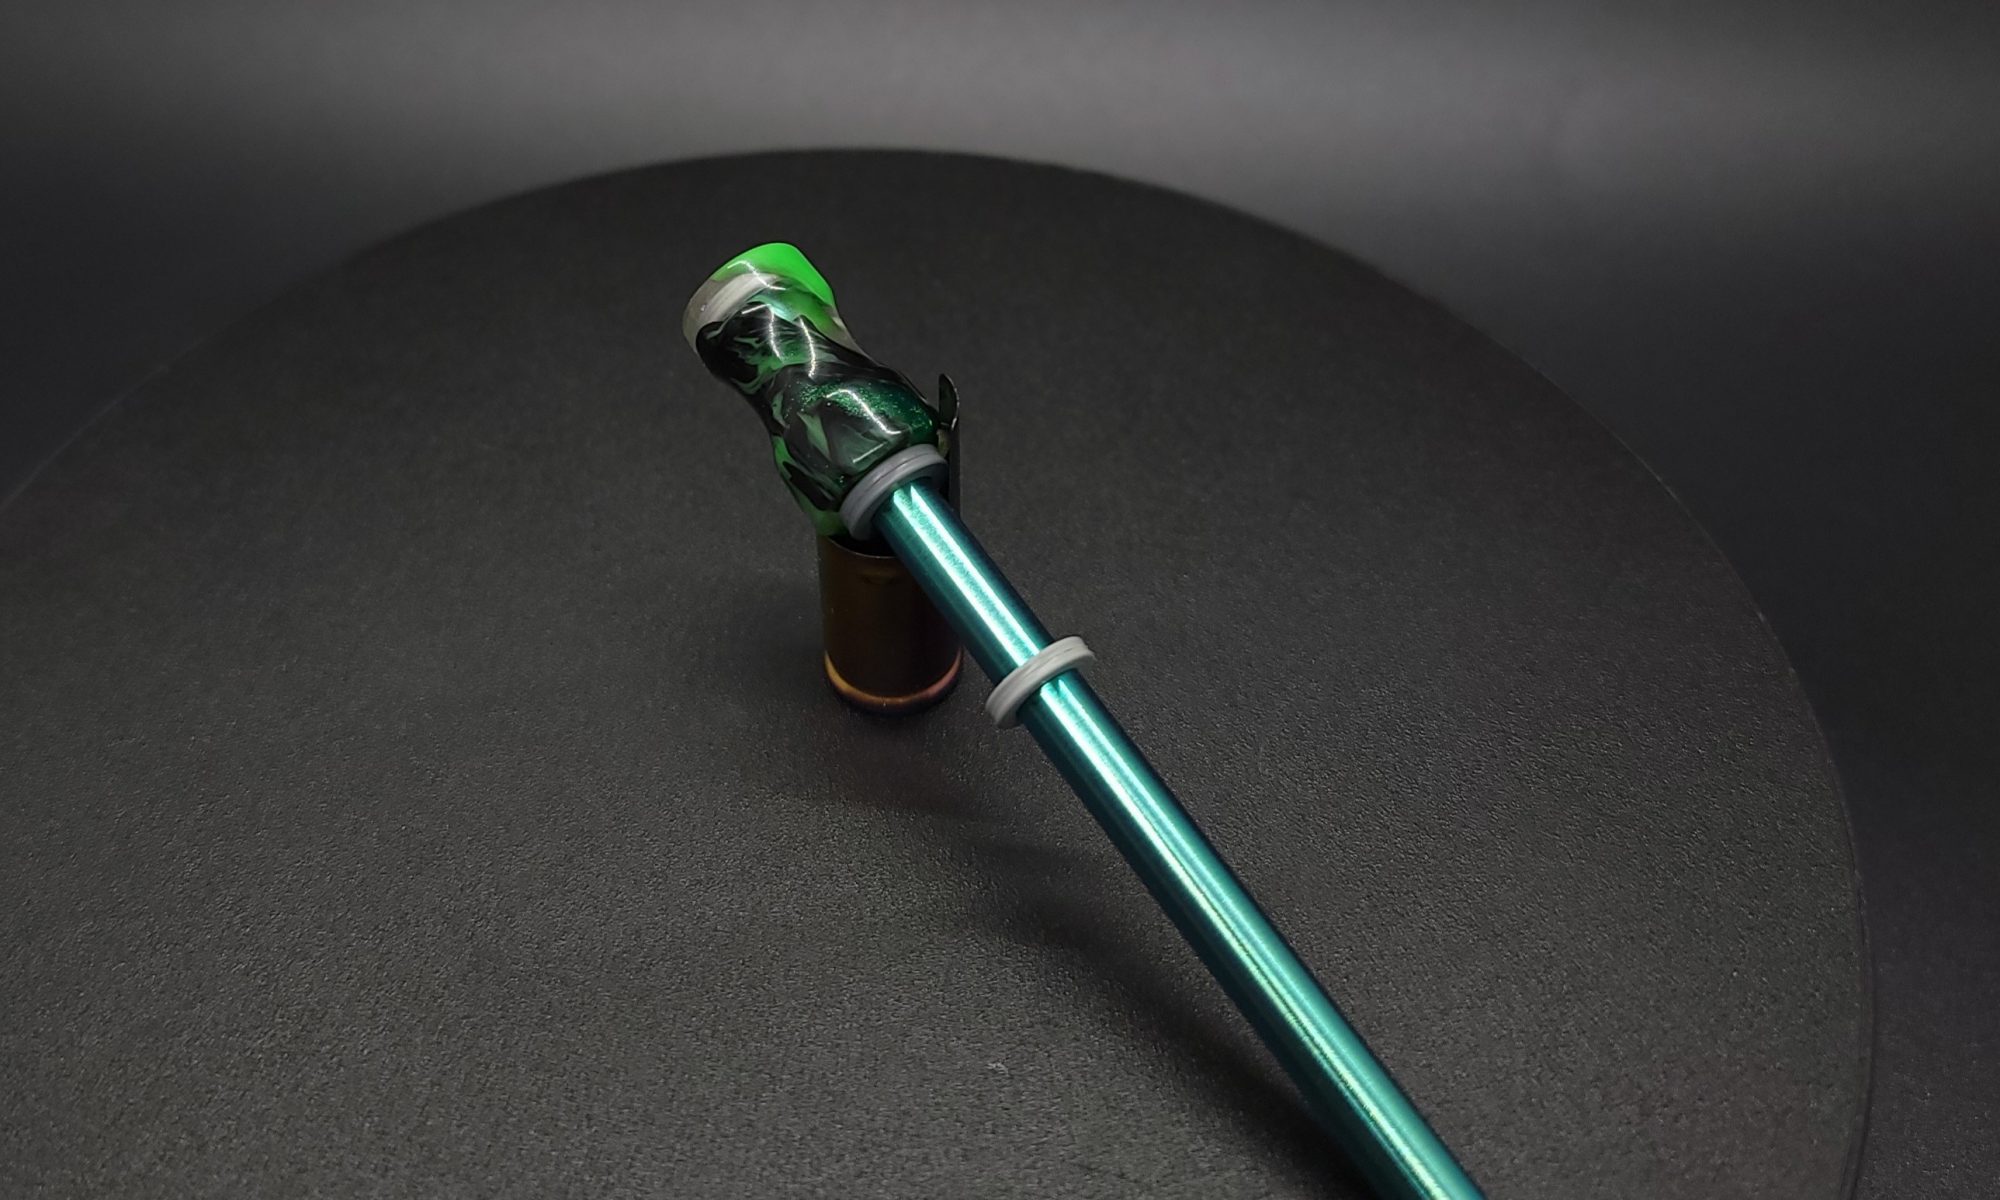 This image portrays Dynavap Spinning Mouthpiece-Galactic Resin by Dovetail Woodwork.